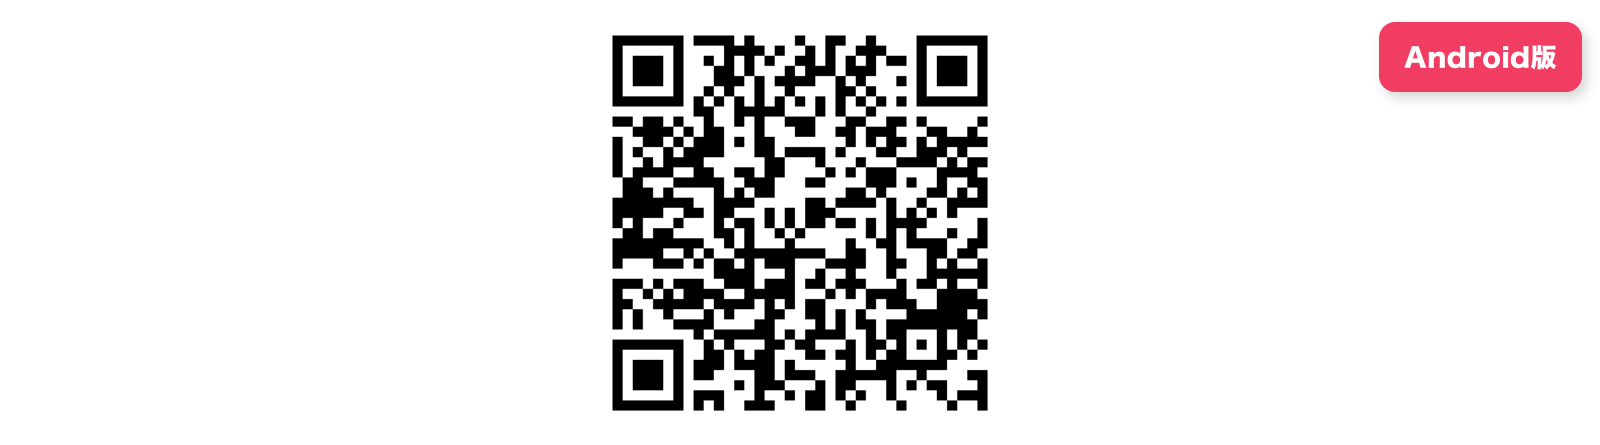 202311qr_android.png